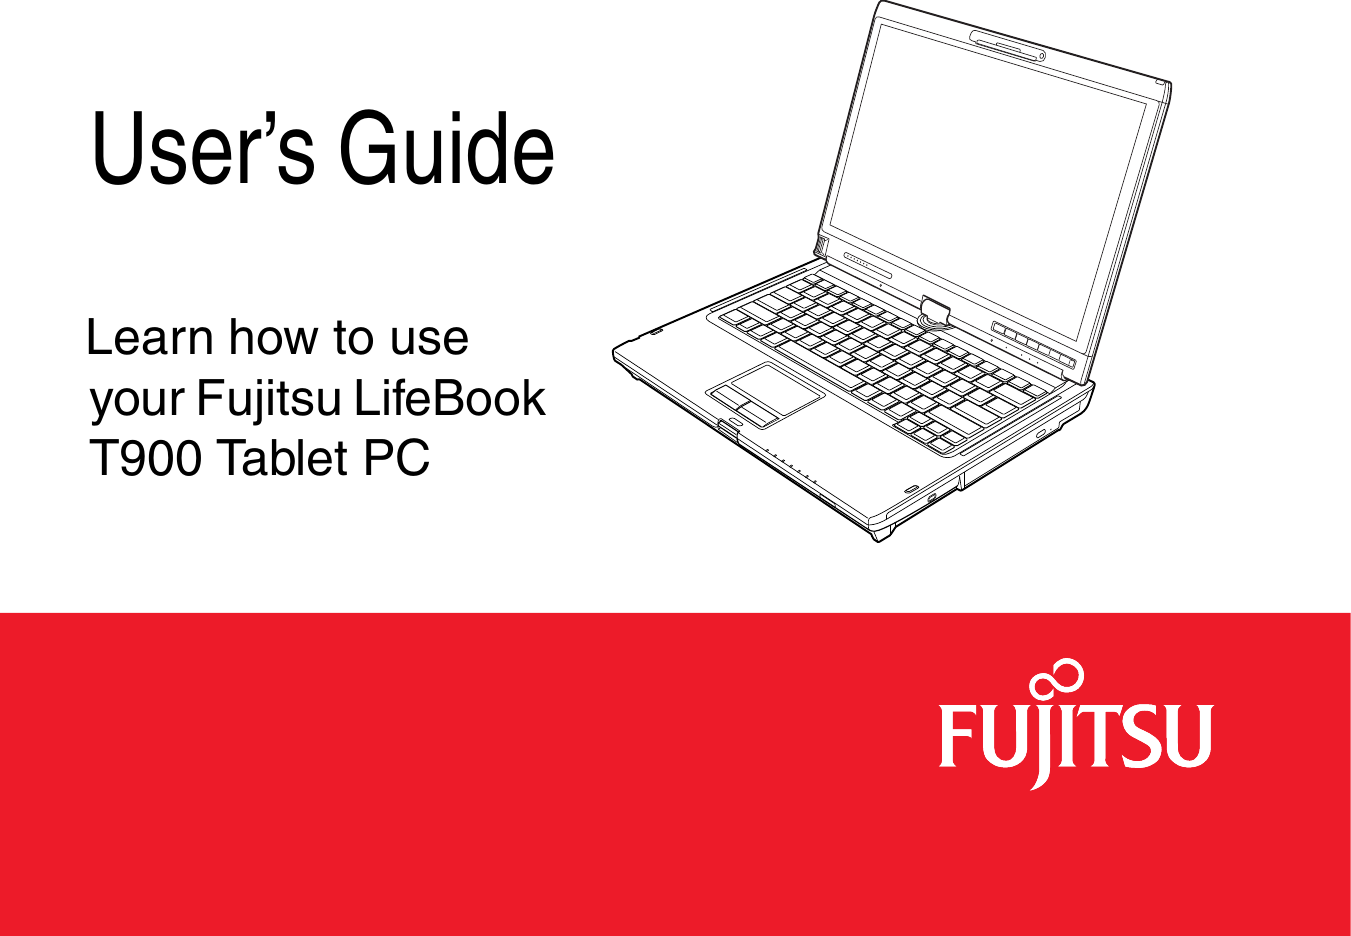  User’s GuideLearn how to use your Fujitsu LifeBook T900 Tablet PC